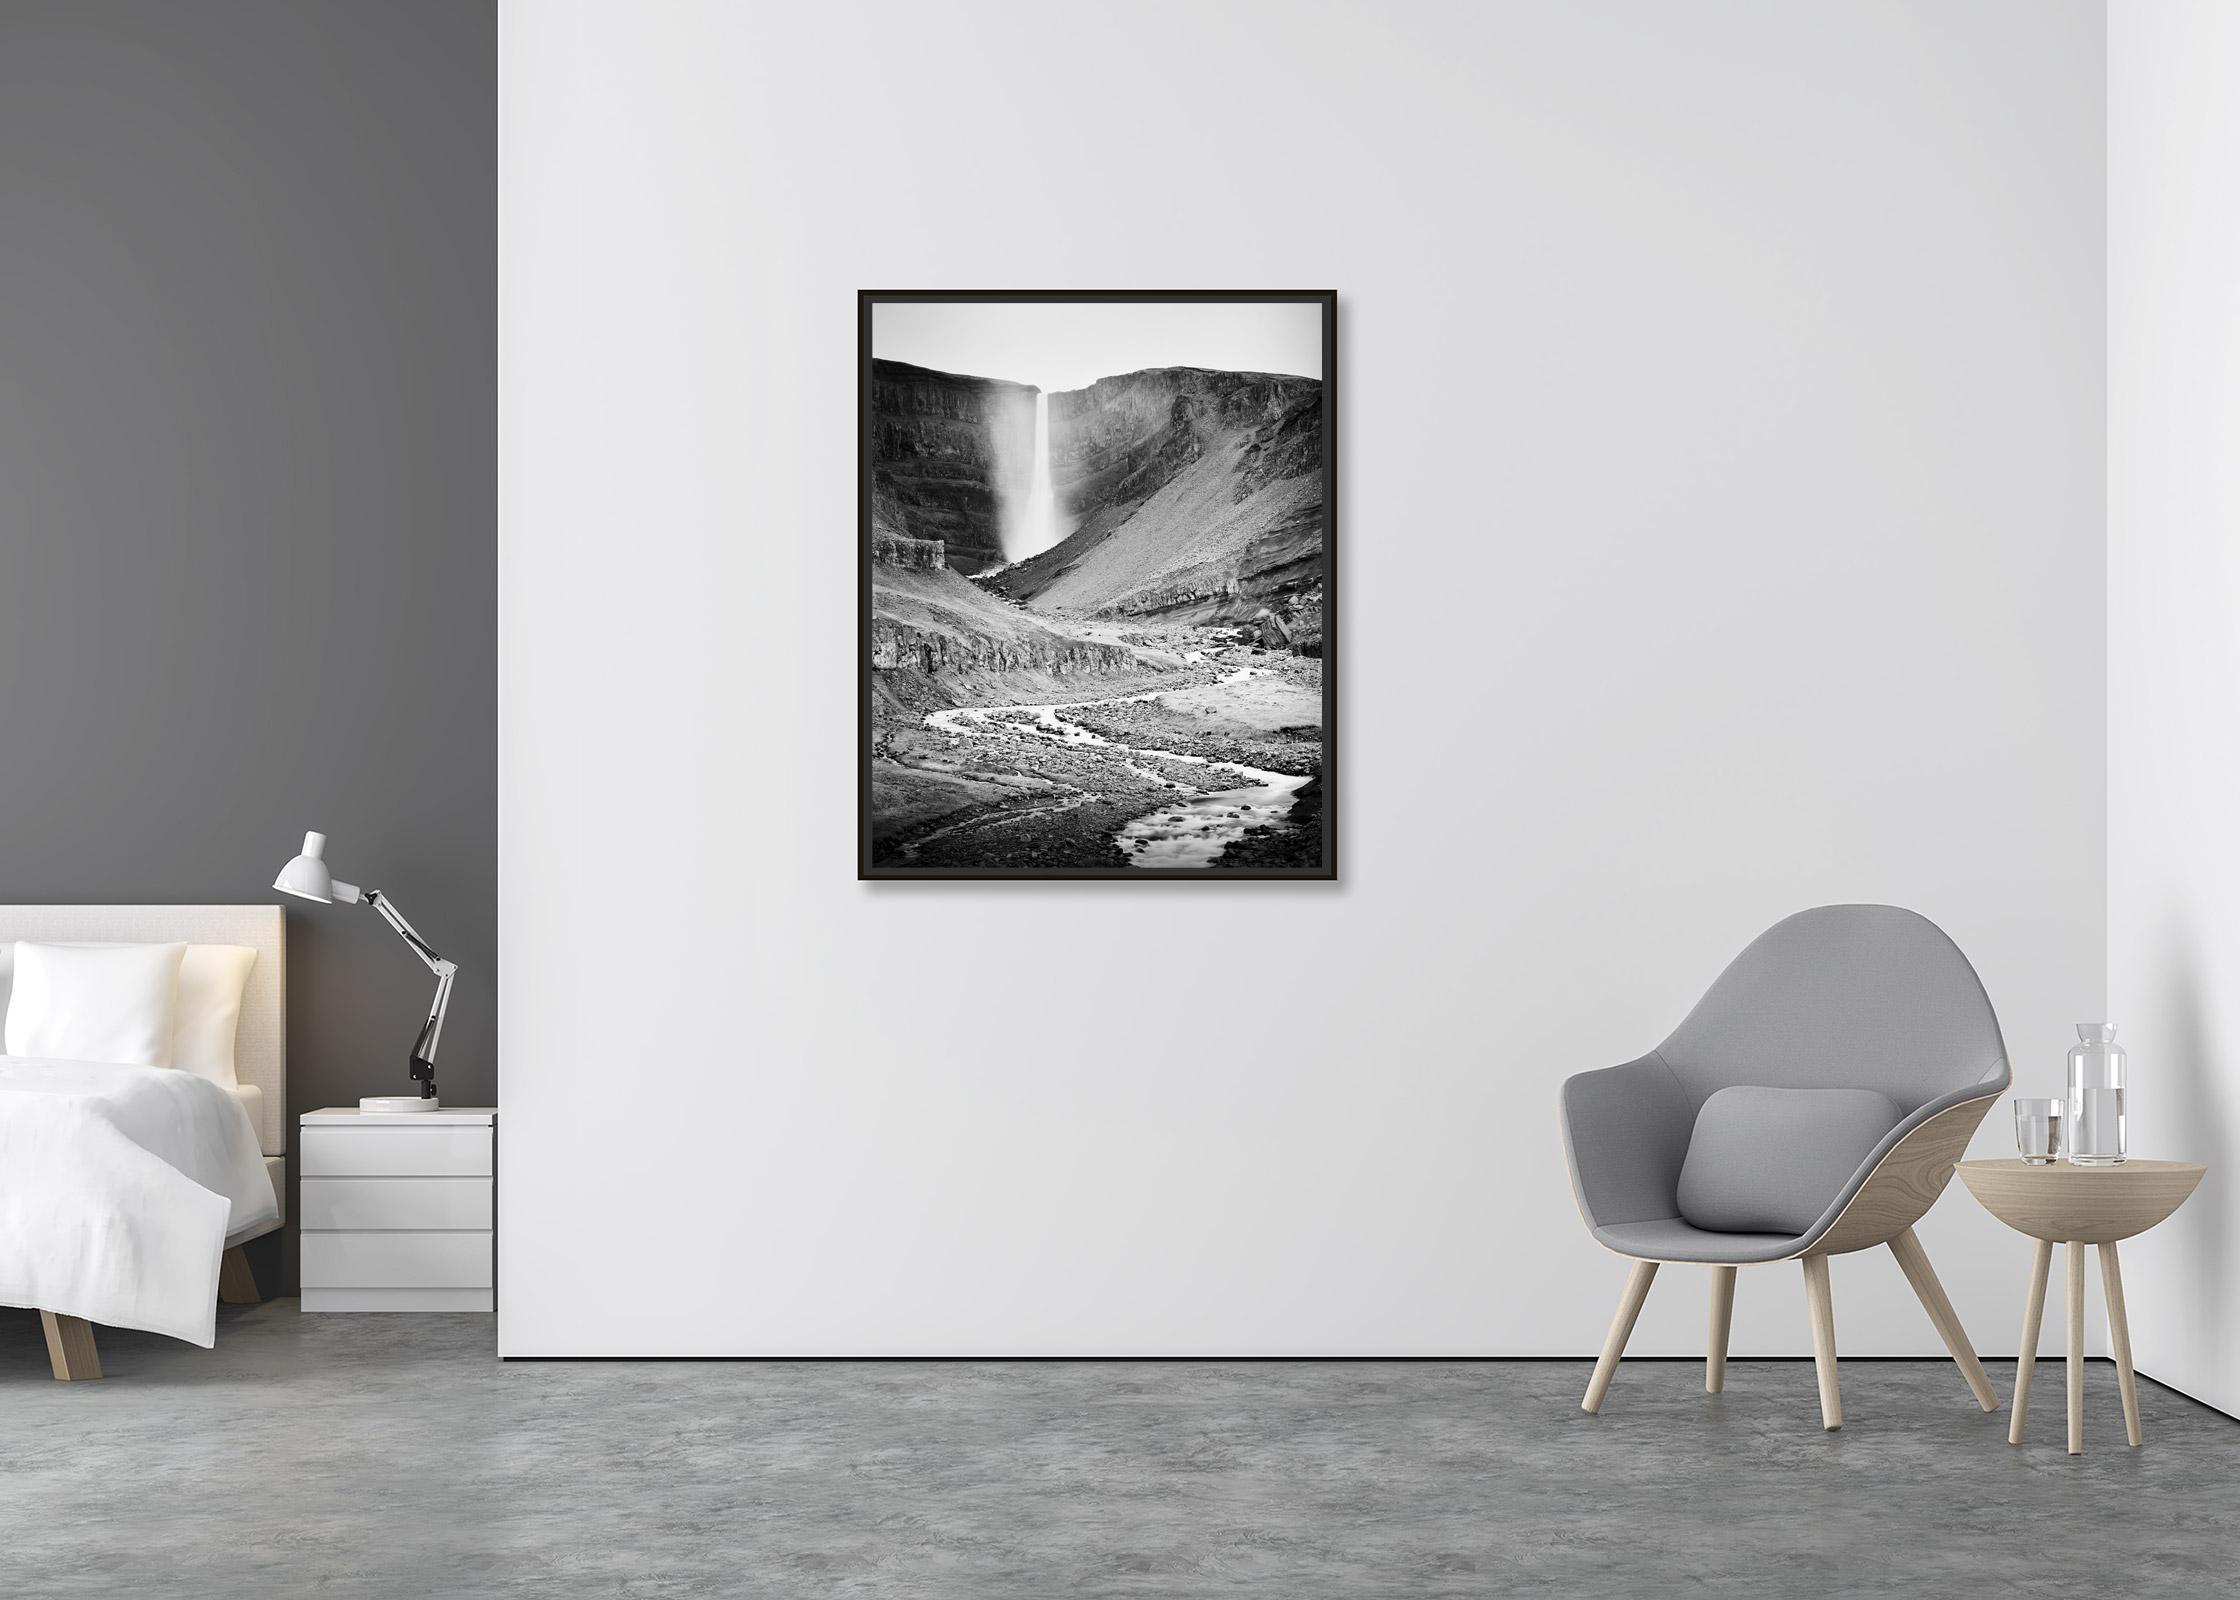 Hengifoss, mountain Waterfall, Iceland, black & white art landscape photography - Contemporary Photograph by Gerald Berghammer